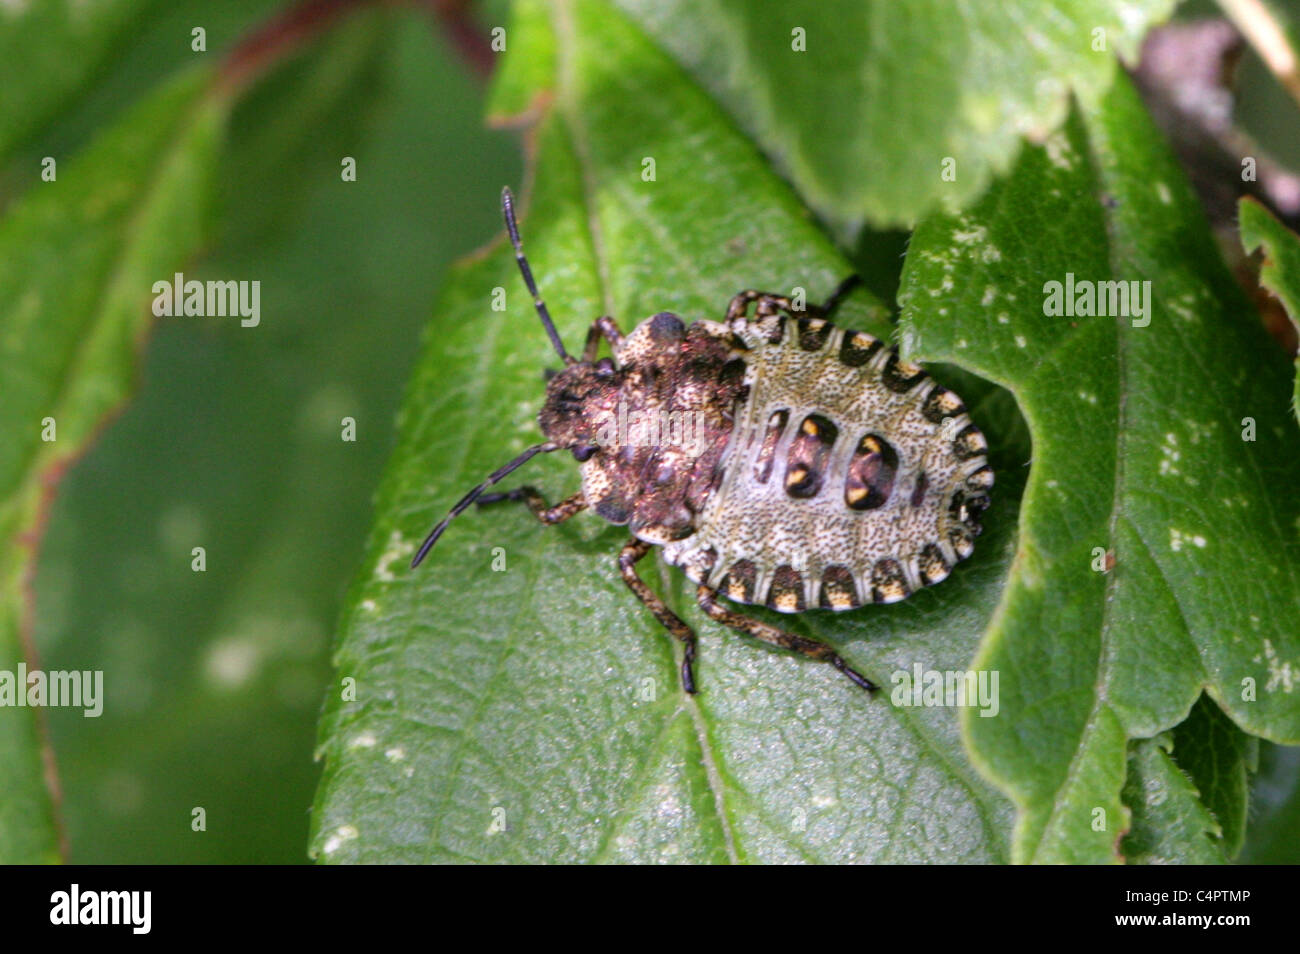 Forest Shieldbug, 2nd or 3rd Instar of Pentatoma rufipes, Pentatomidae, Hemiptera. Nymph stage before becoming an adult insect. Stock Photo